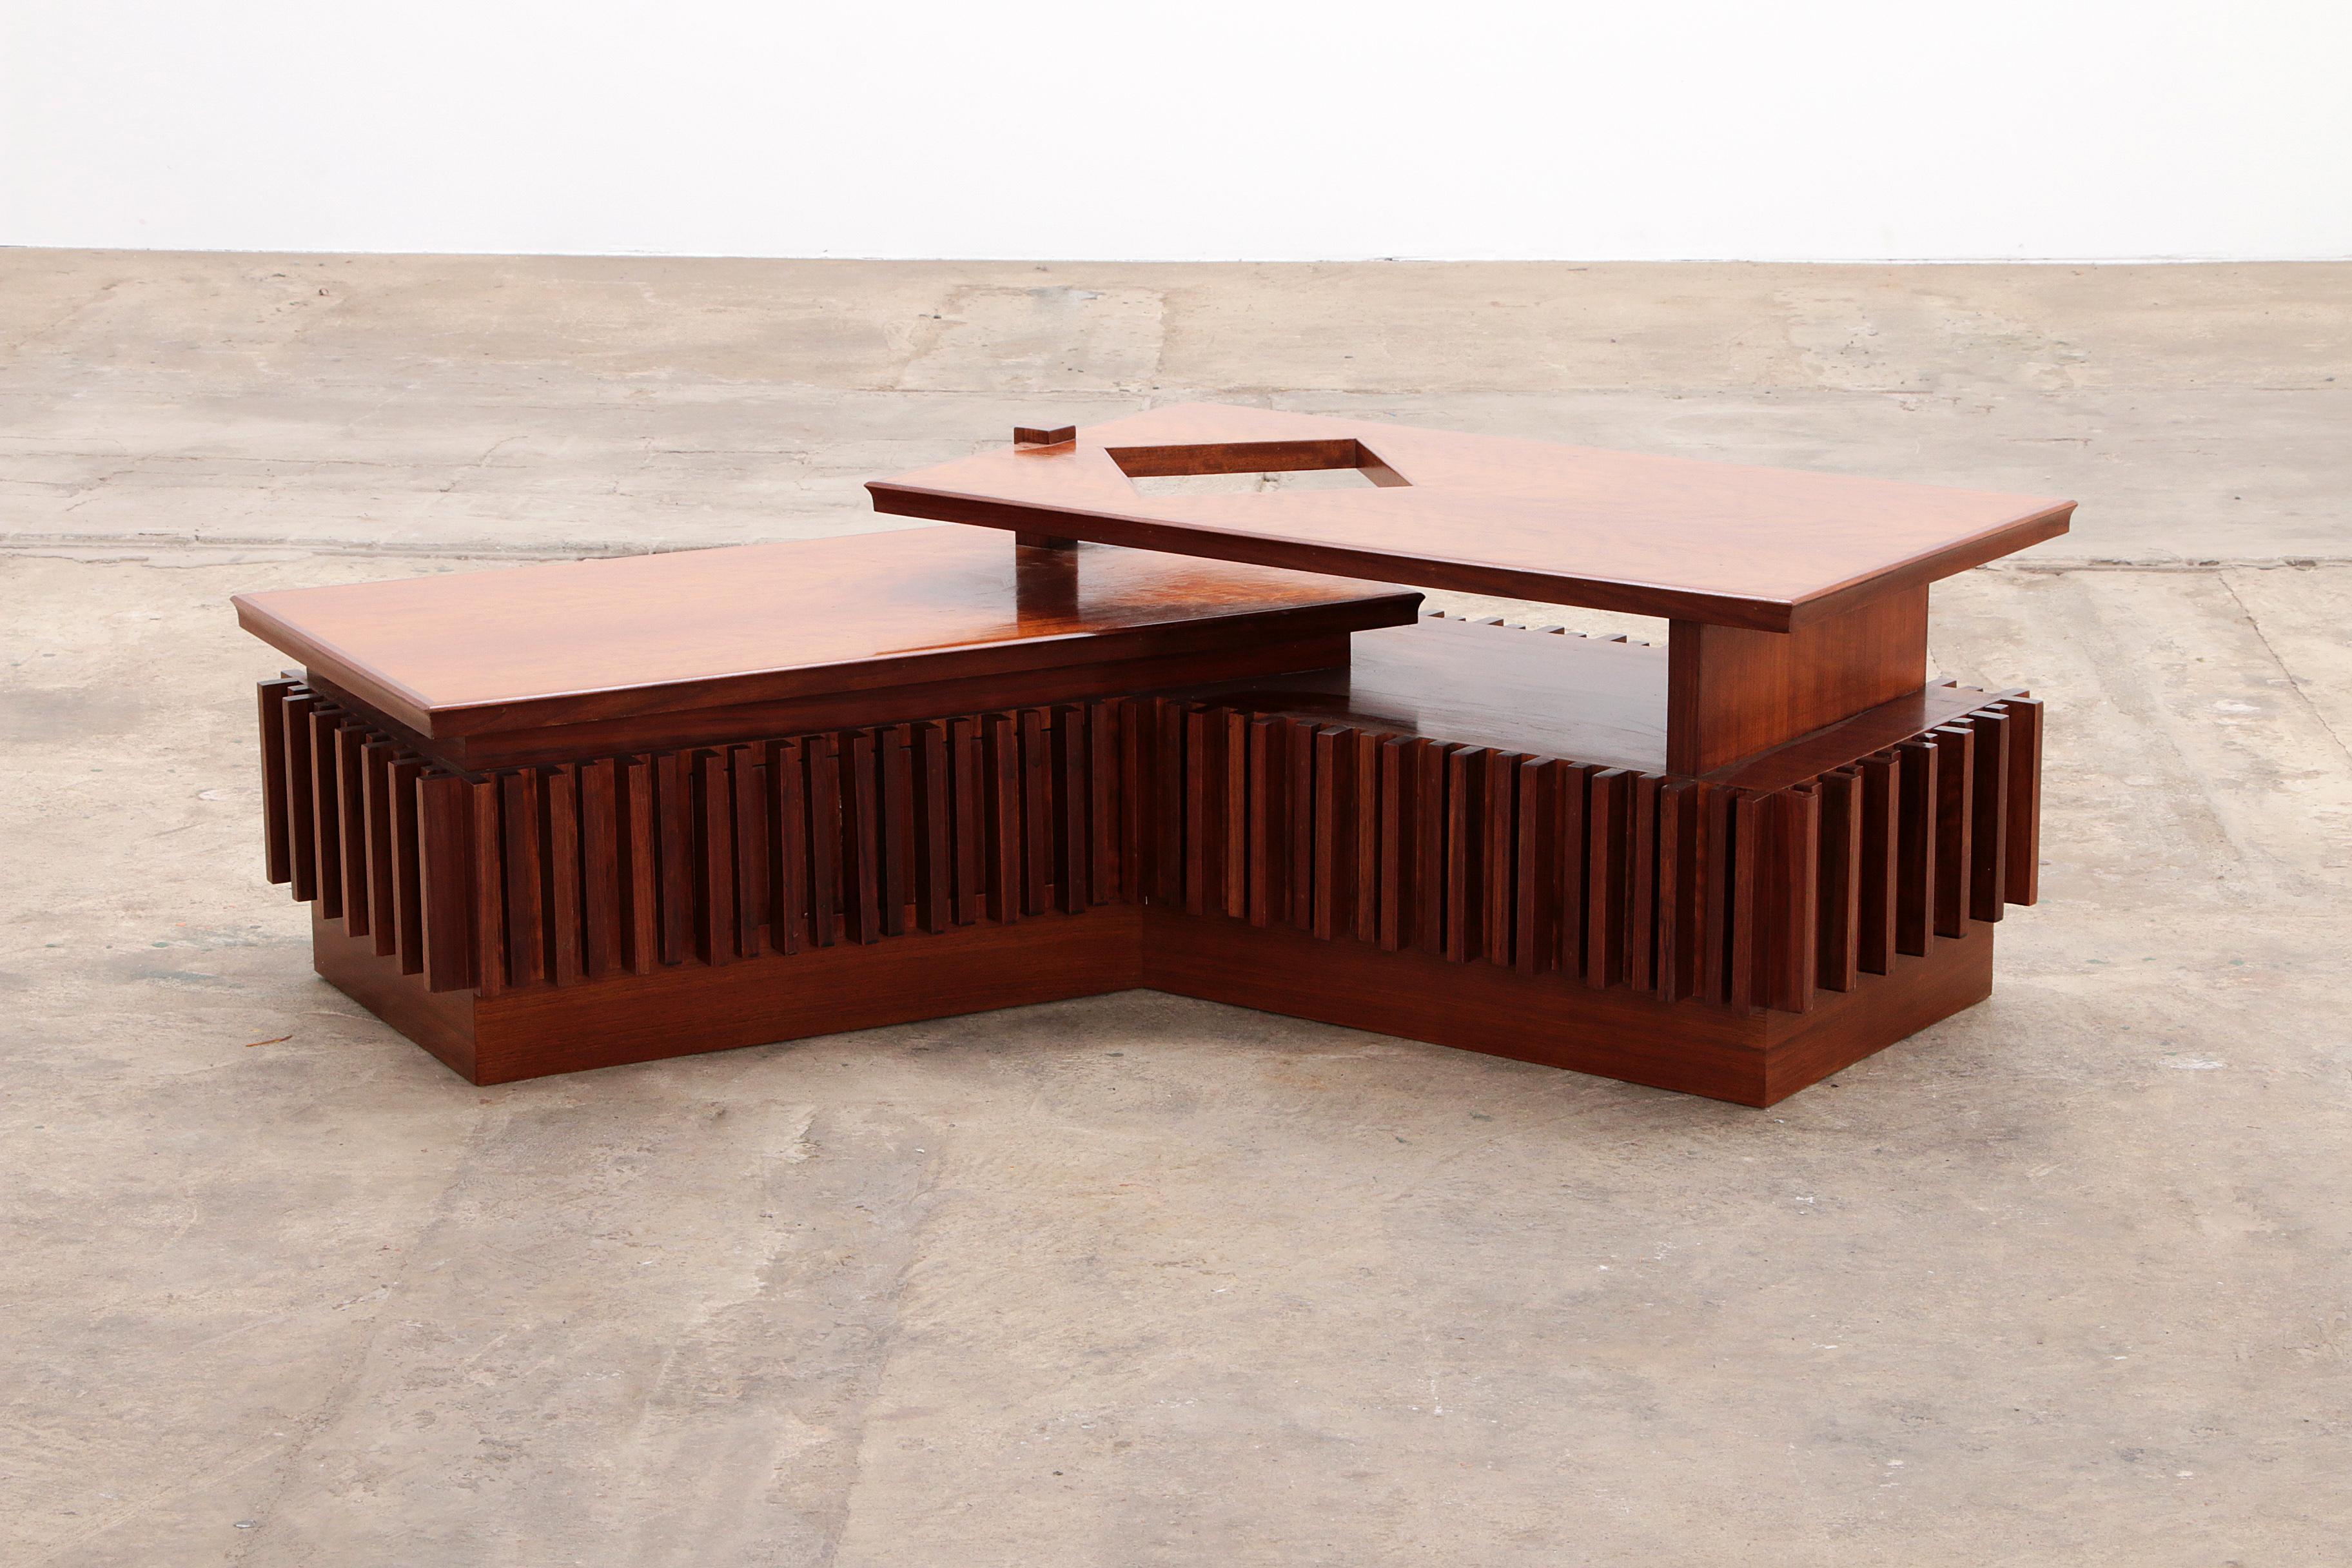 Discover the elegance and craftsmanship of the 70s with the Brutalist Coffee Table 